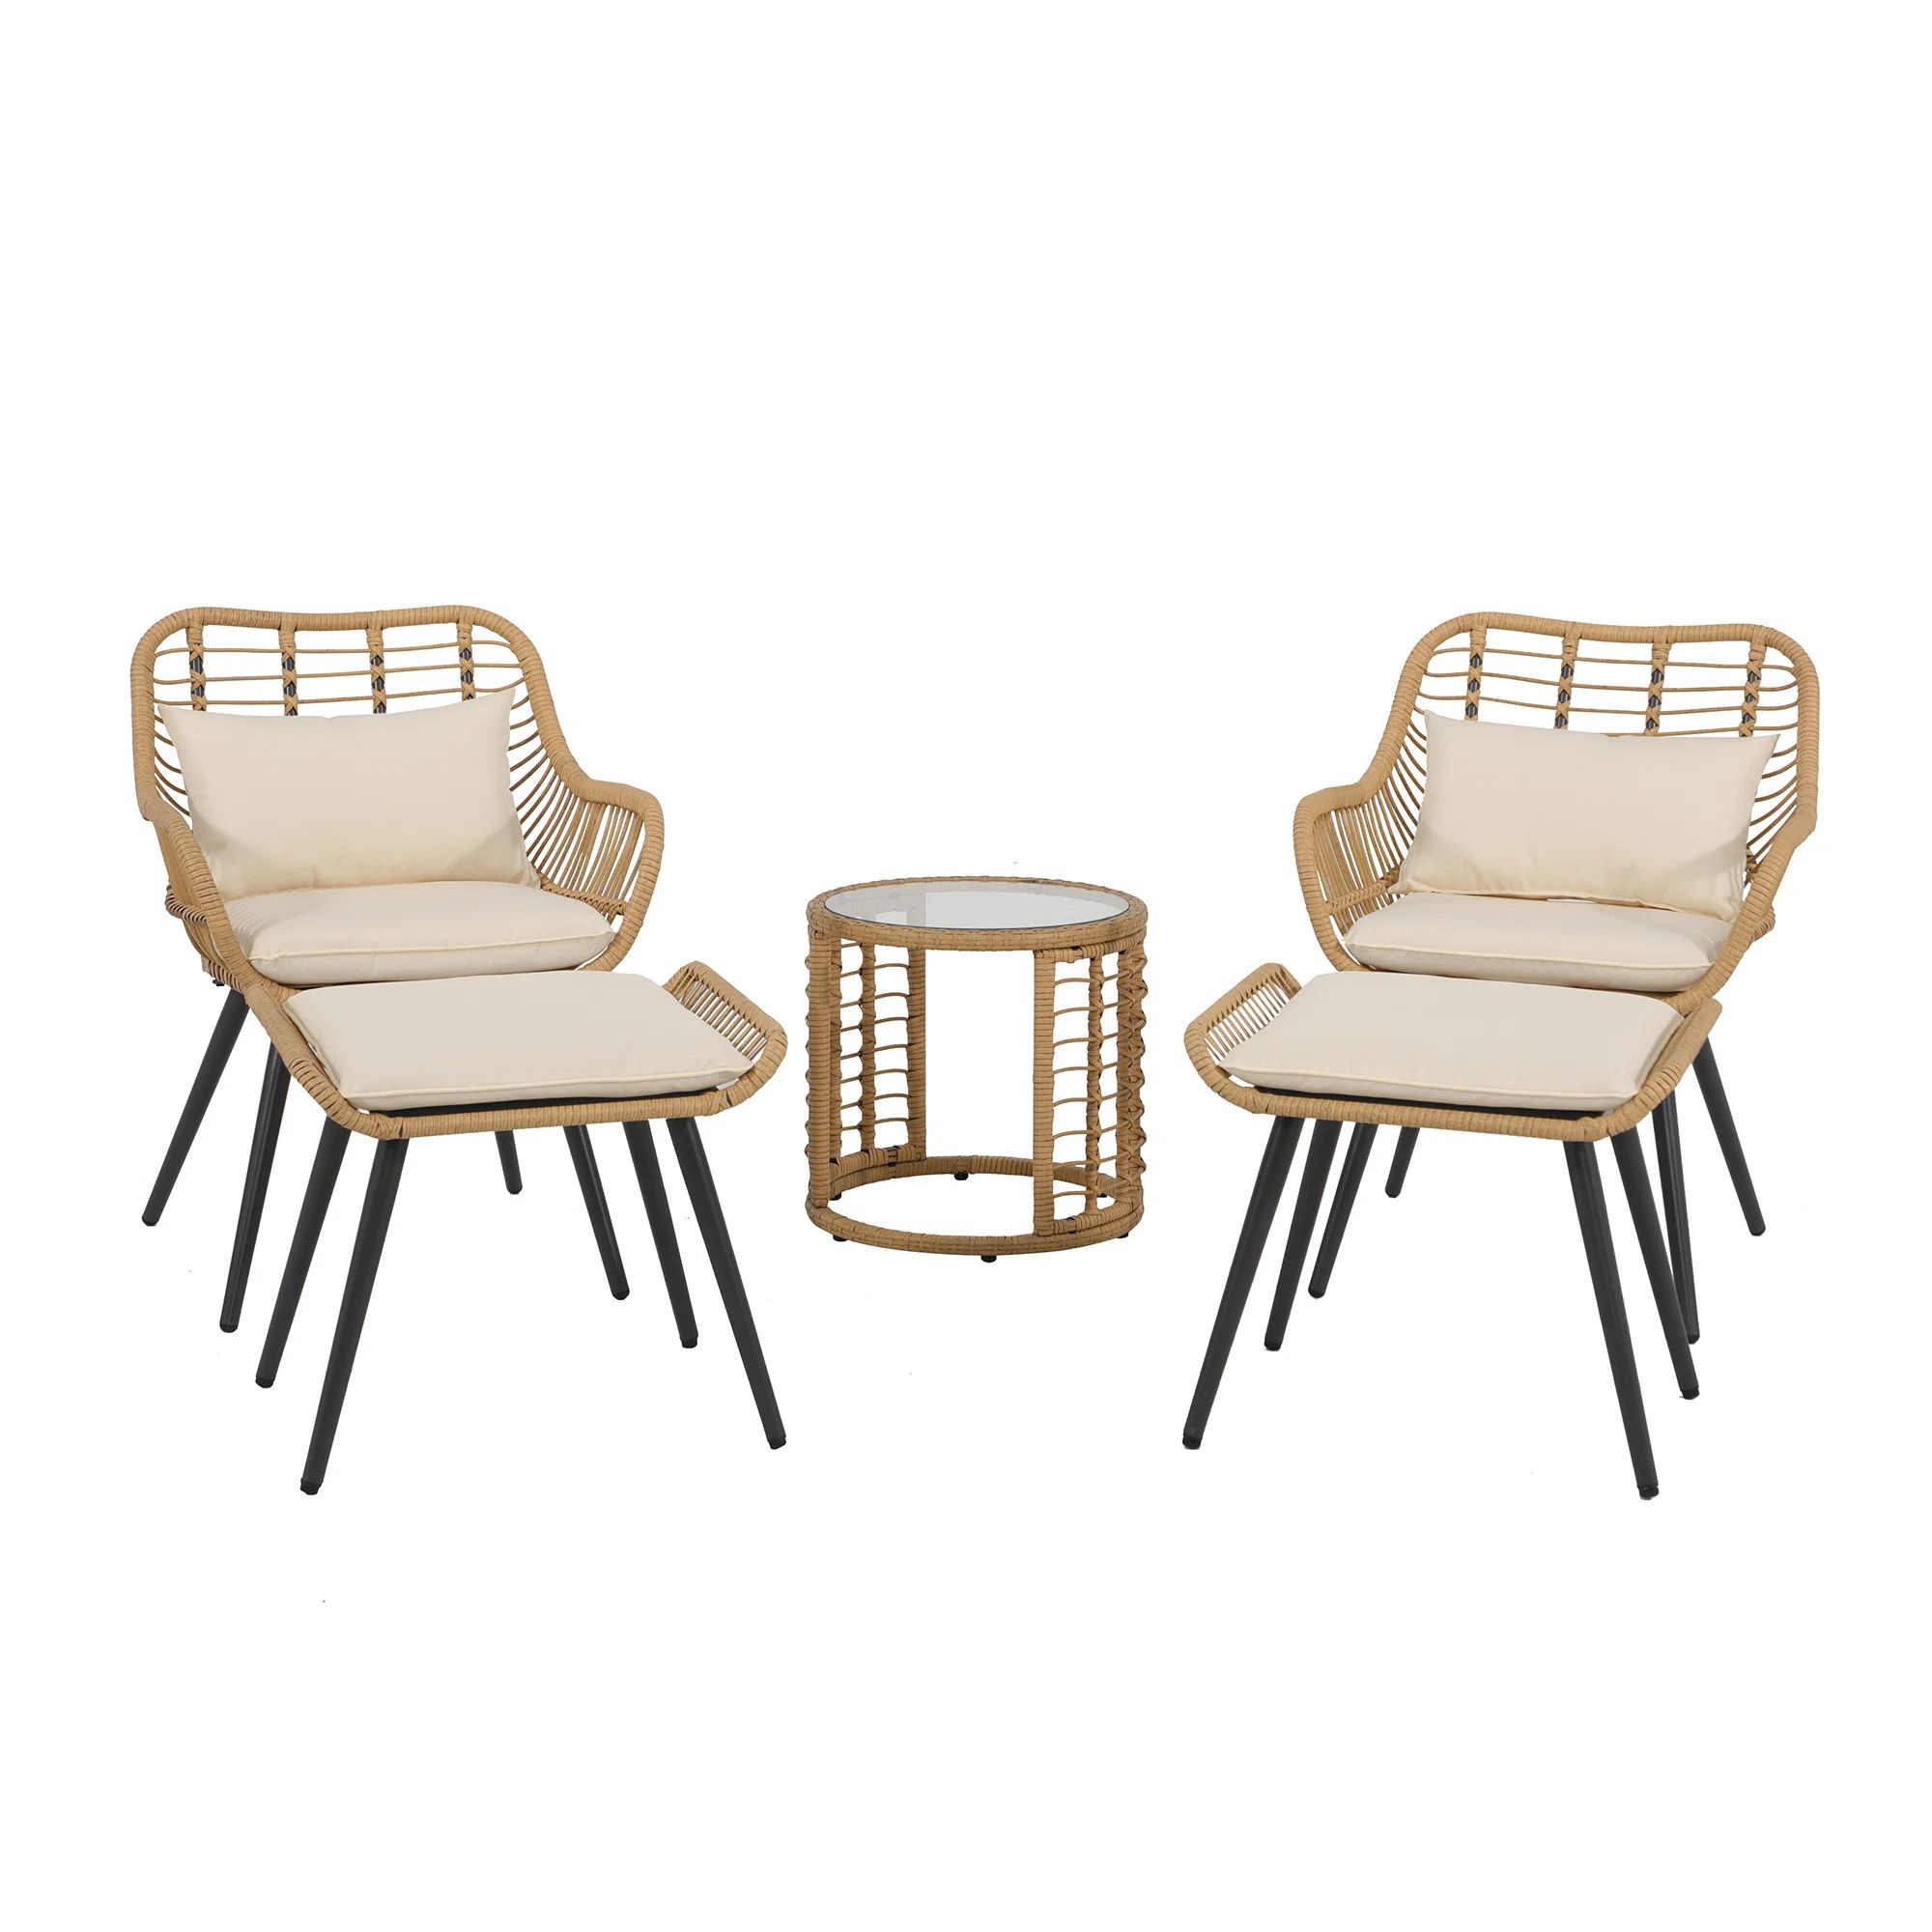 Giblin Outdoor Seating Group with Cushions | Wayfair North America